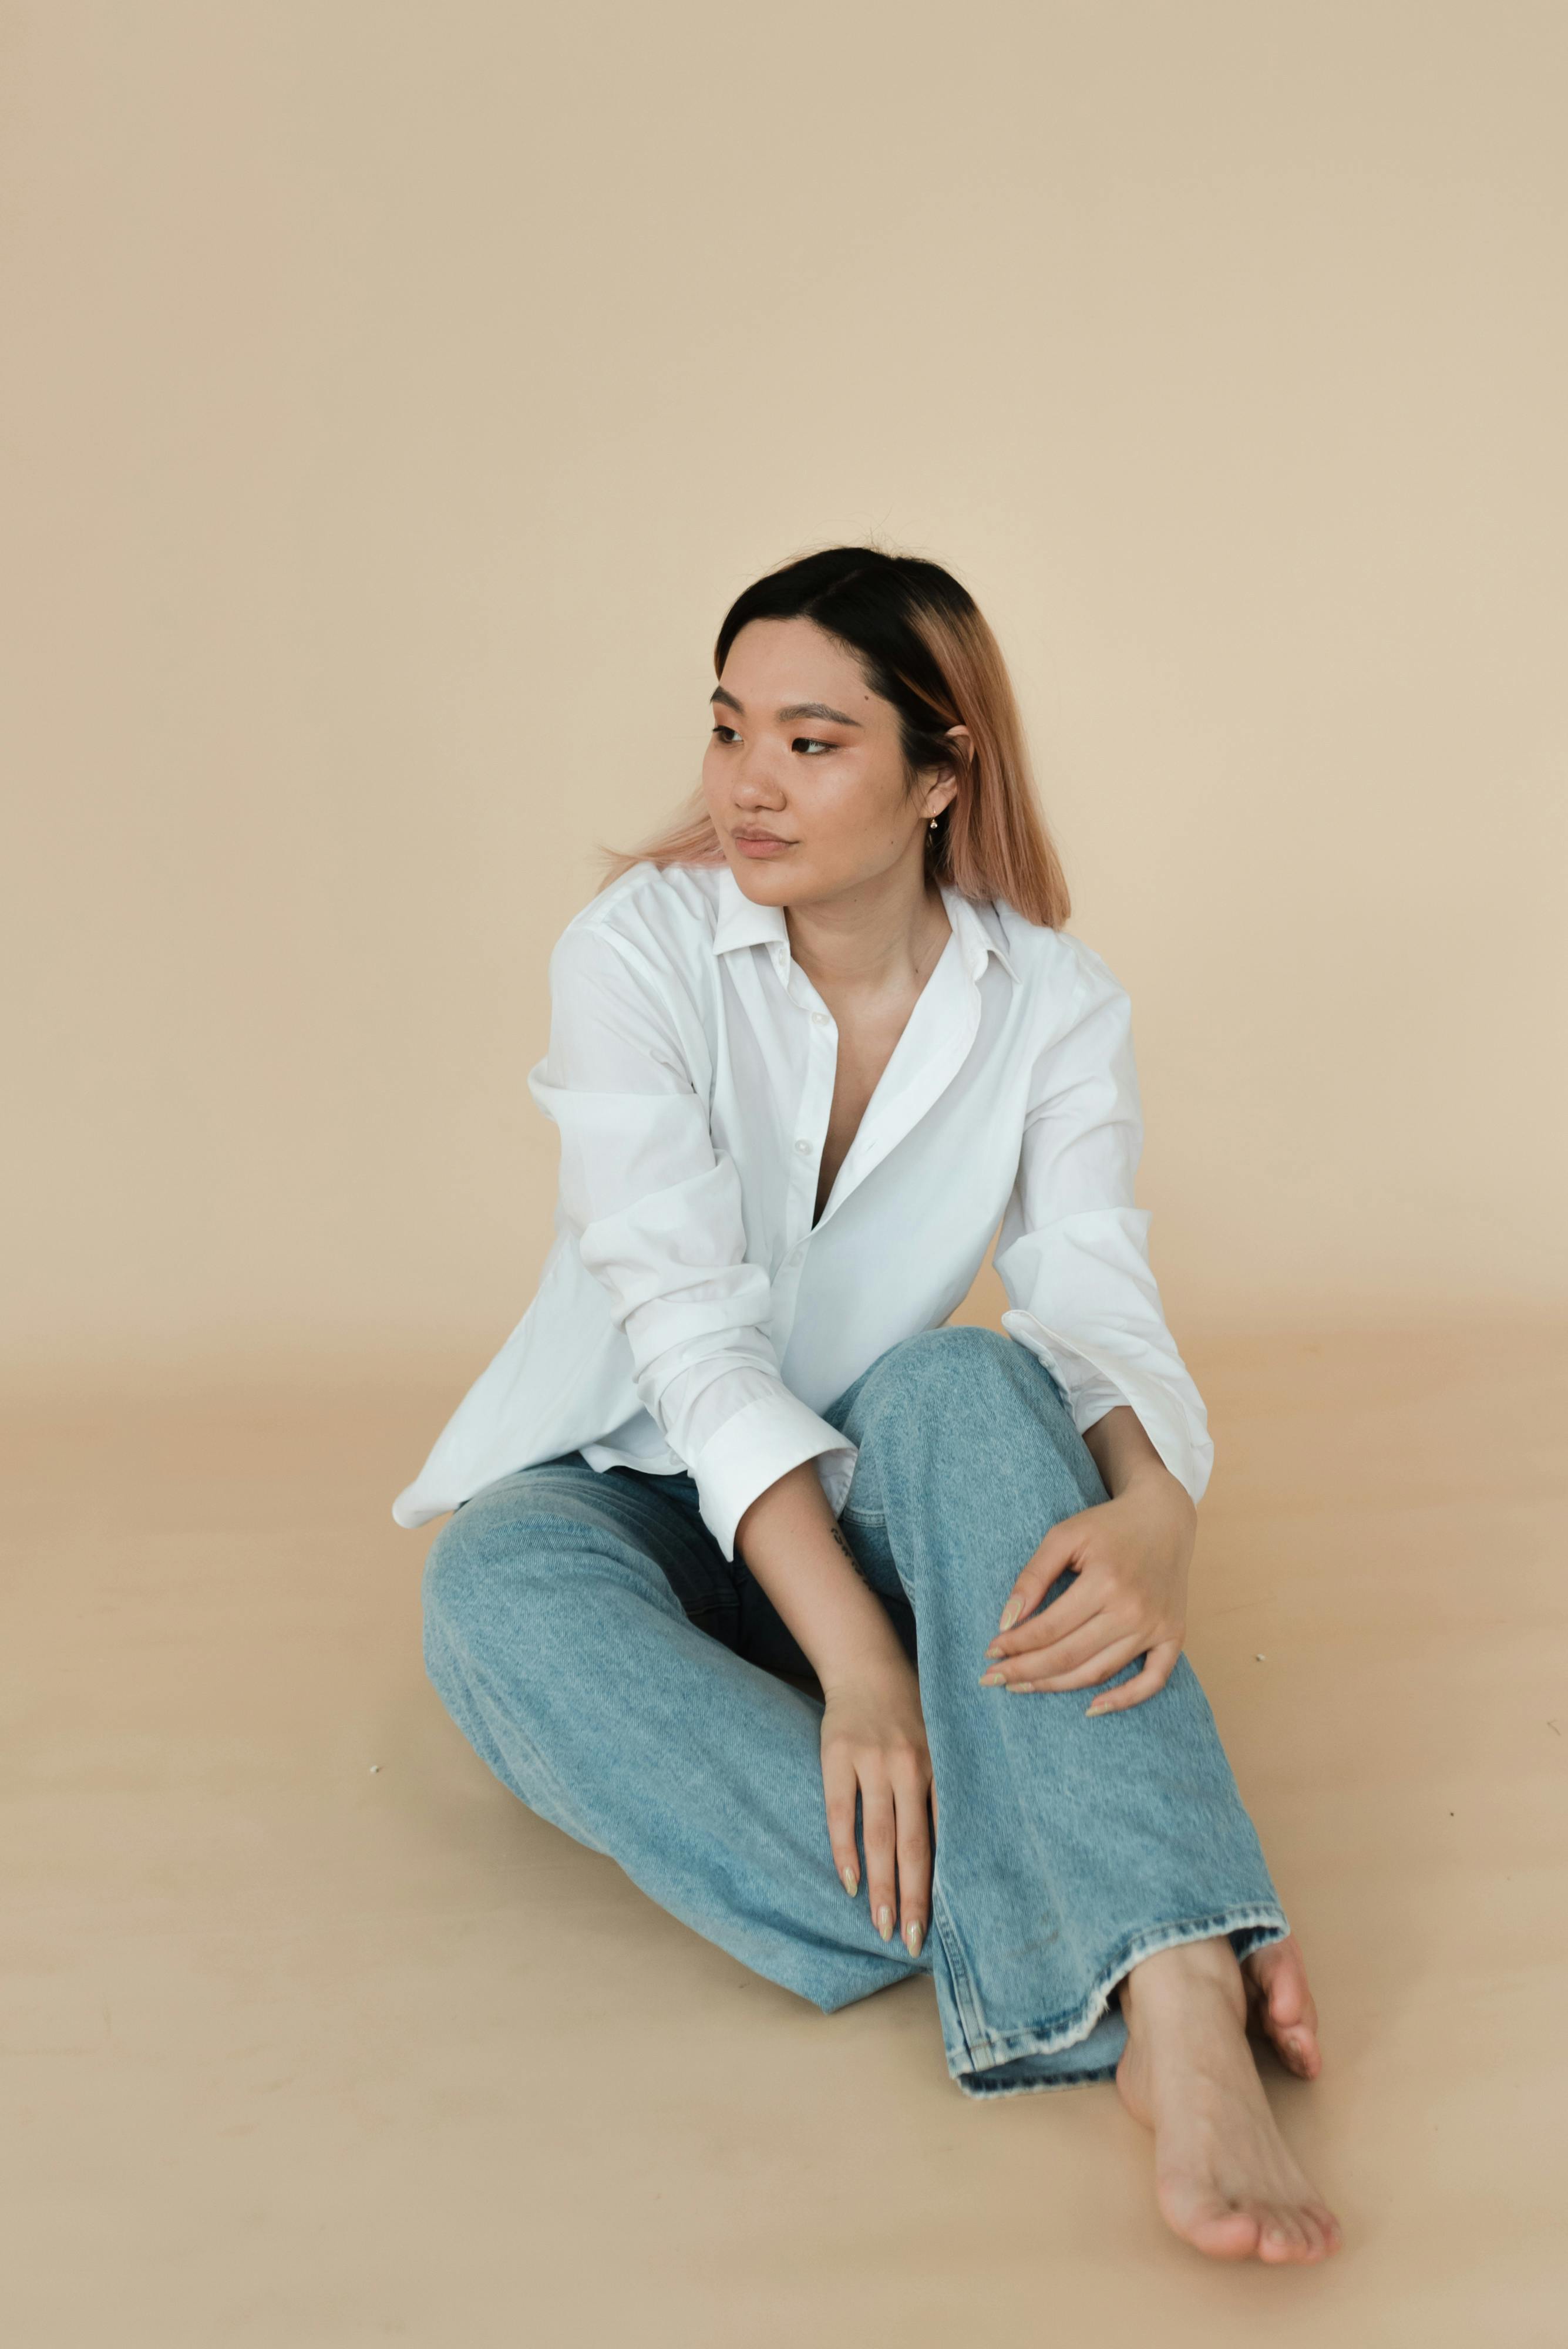 Woman in White Button Down Shirt and Denim Jeans · Free Stock Photo